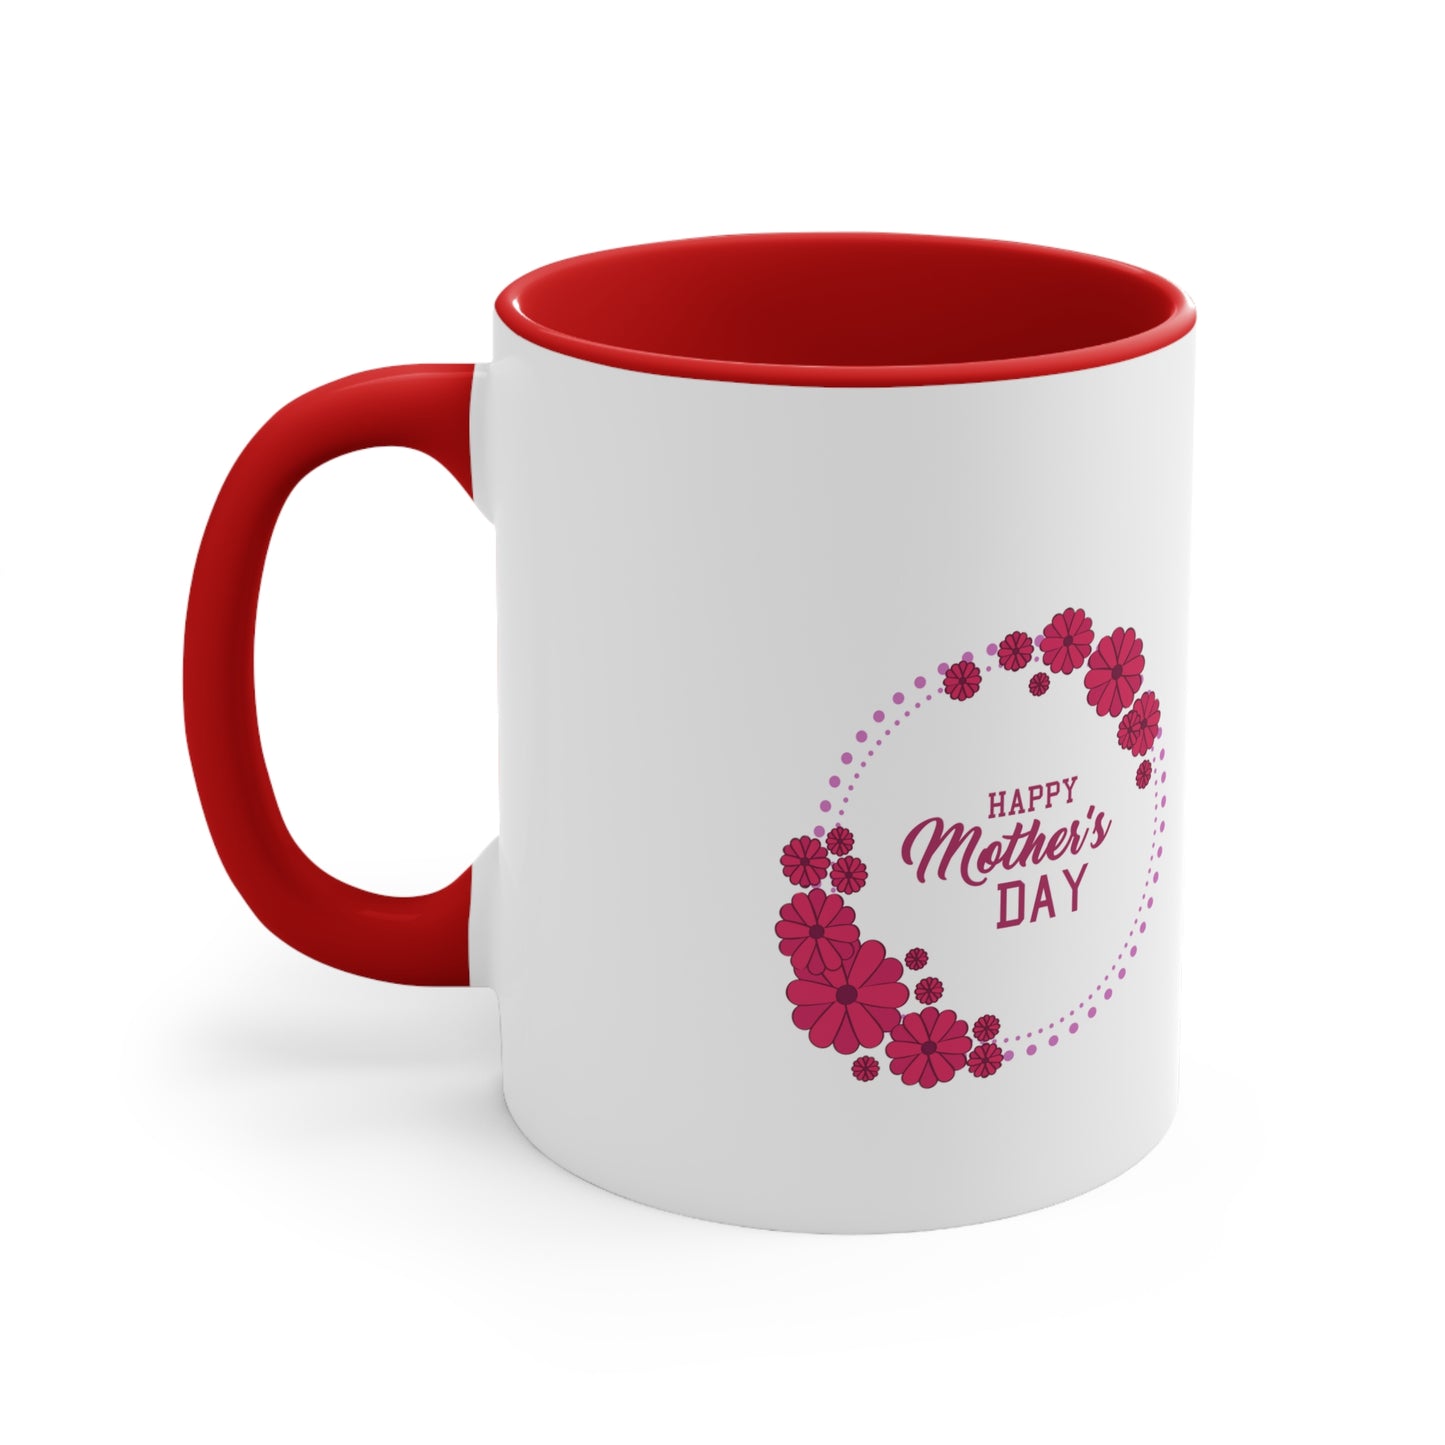 Mother's Day Coffee Mug, Perfect Mother's Day Gift, Mother's Day Floral Coffee Mug, Essential Mother's Day Coffee Cup, Cheerful Mother's Day Mug, timental Mother's Day Cup, Stylish Mom Gift